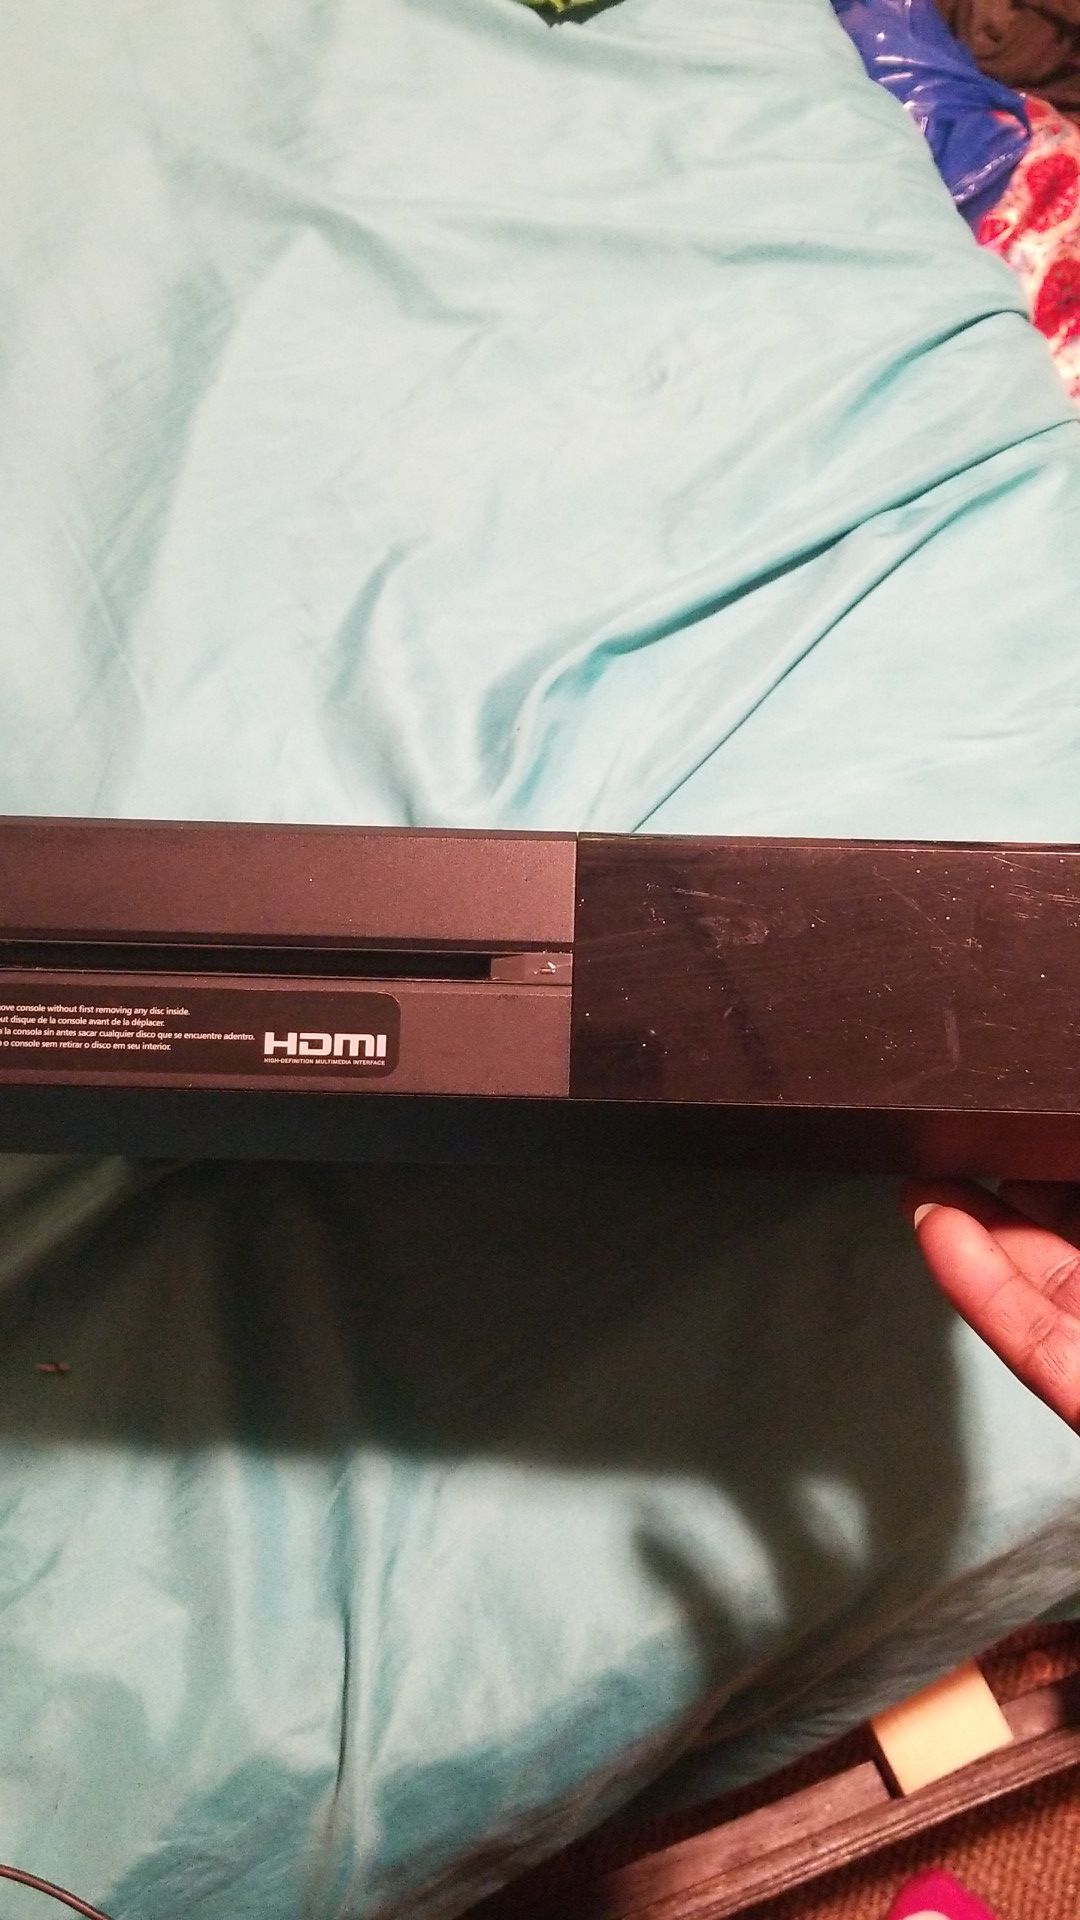 Xbox one for sale need gone asap